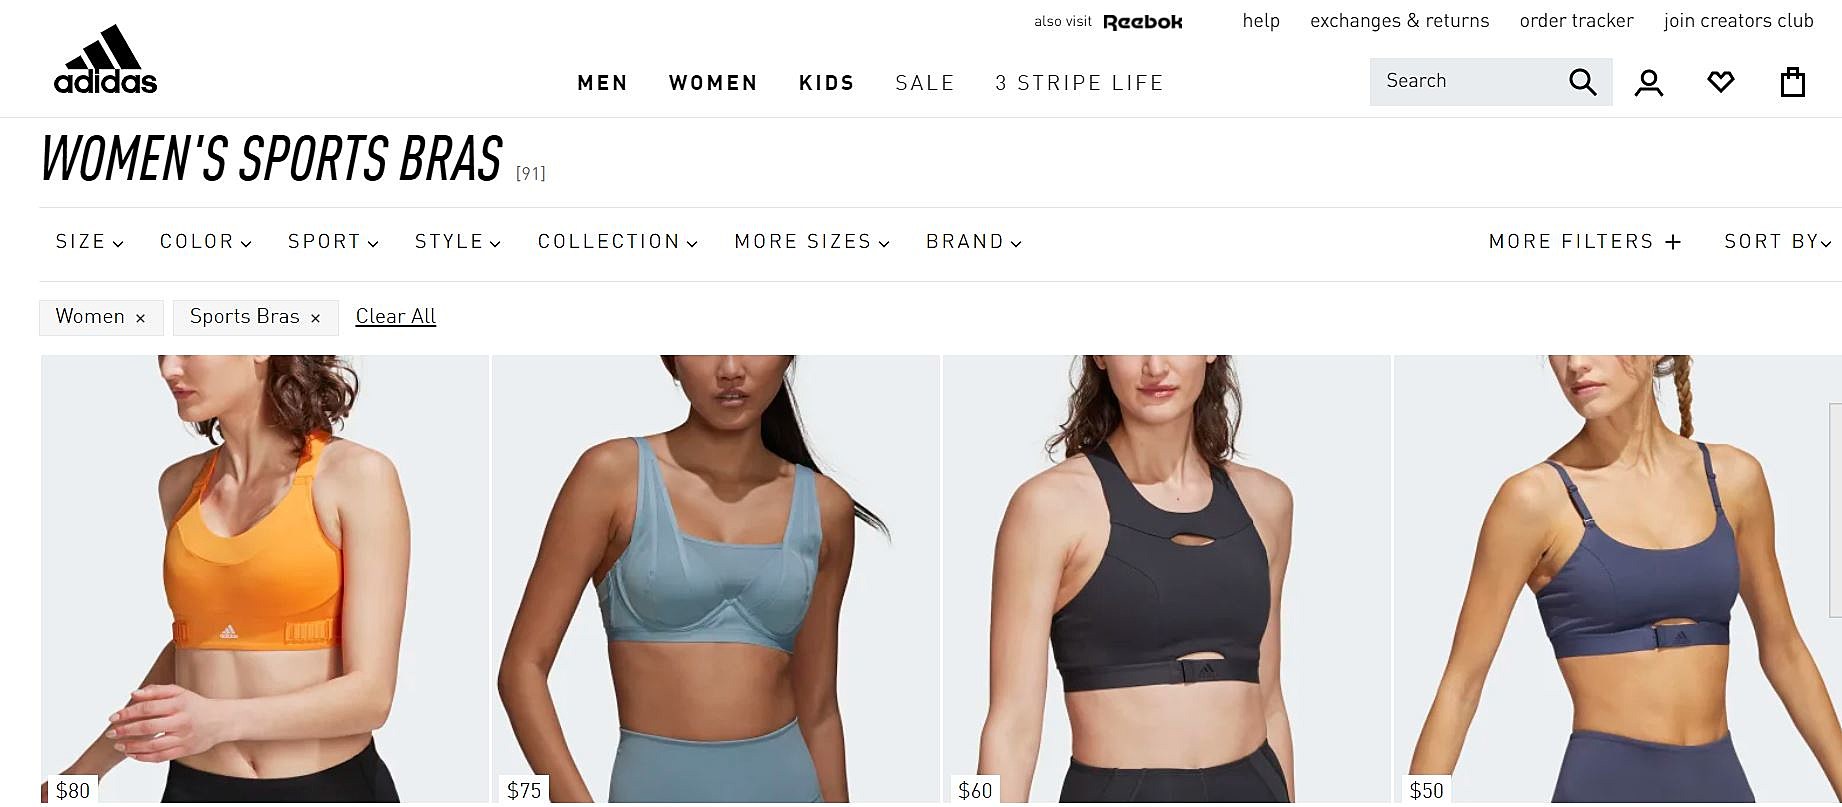 Adidas' bare breast campaign to promote its sports bras sparks